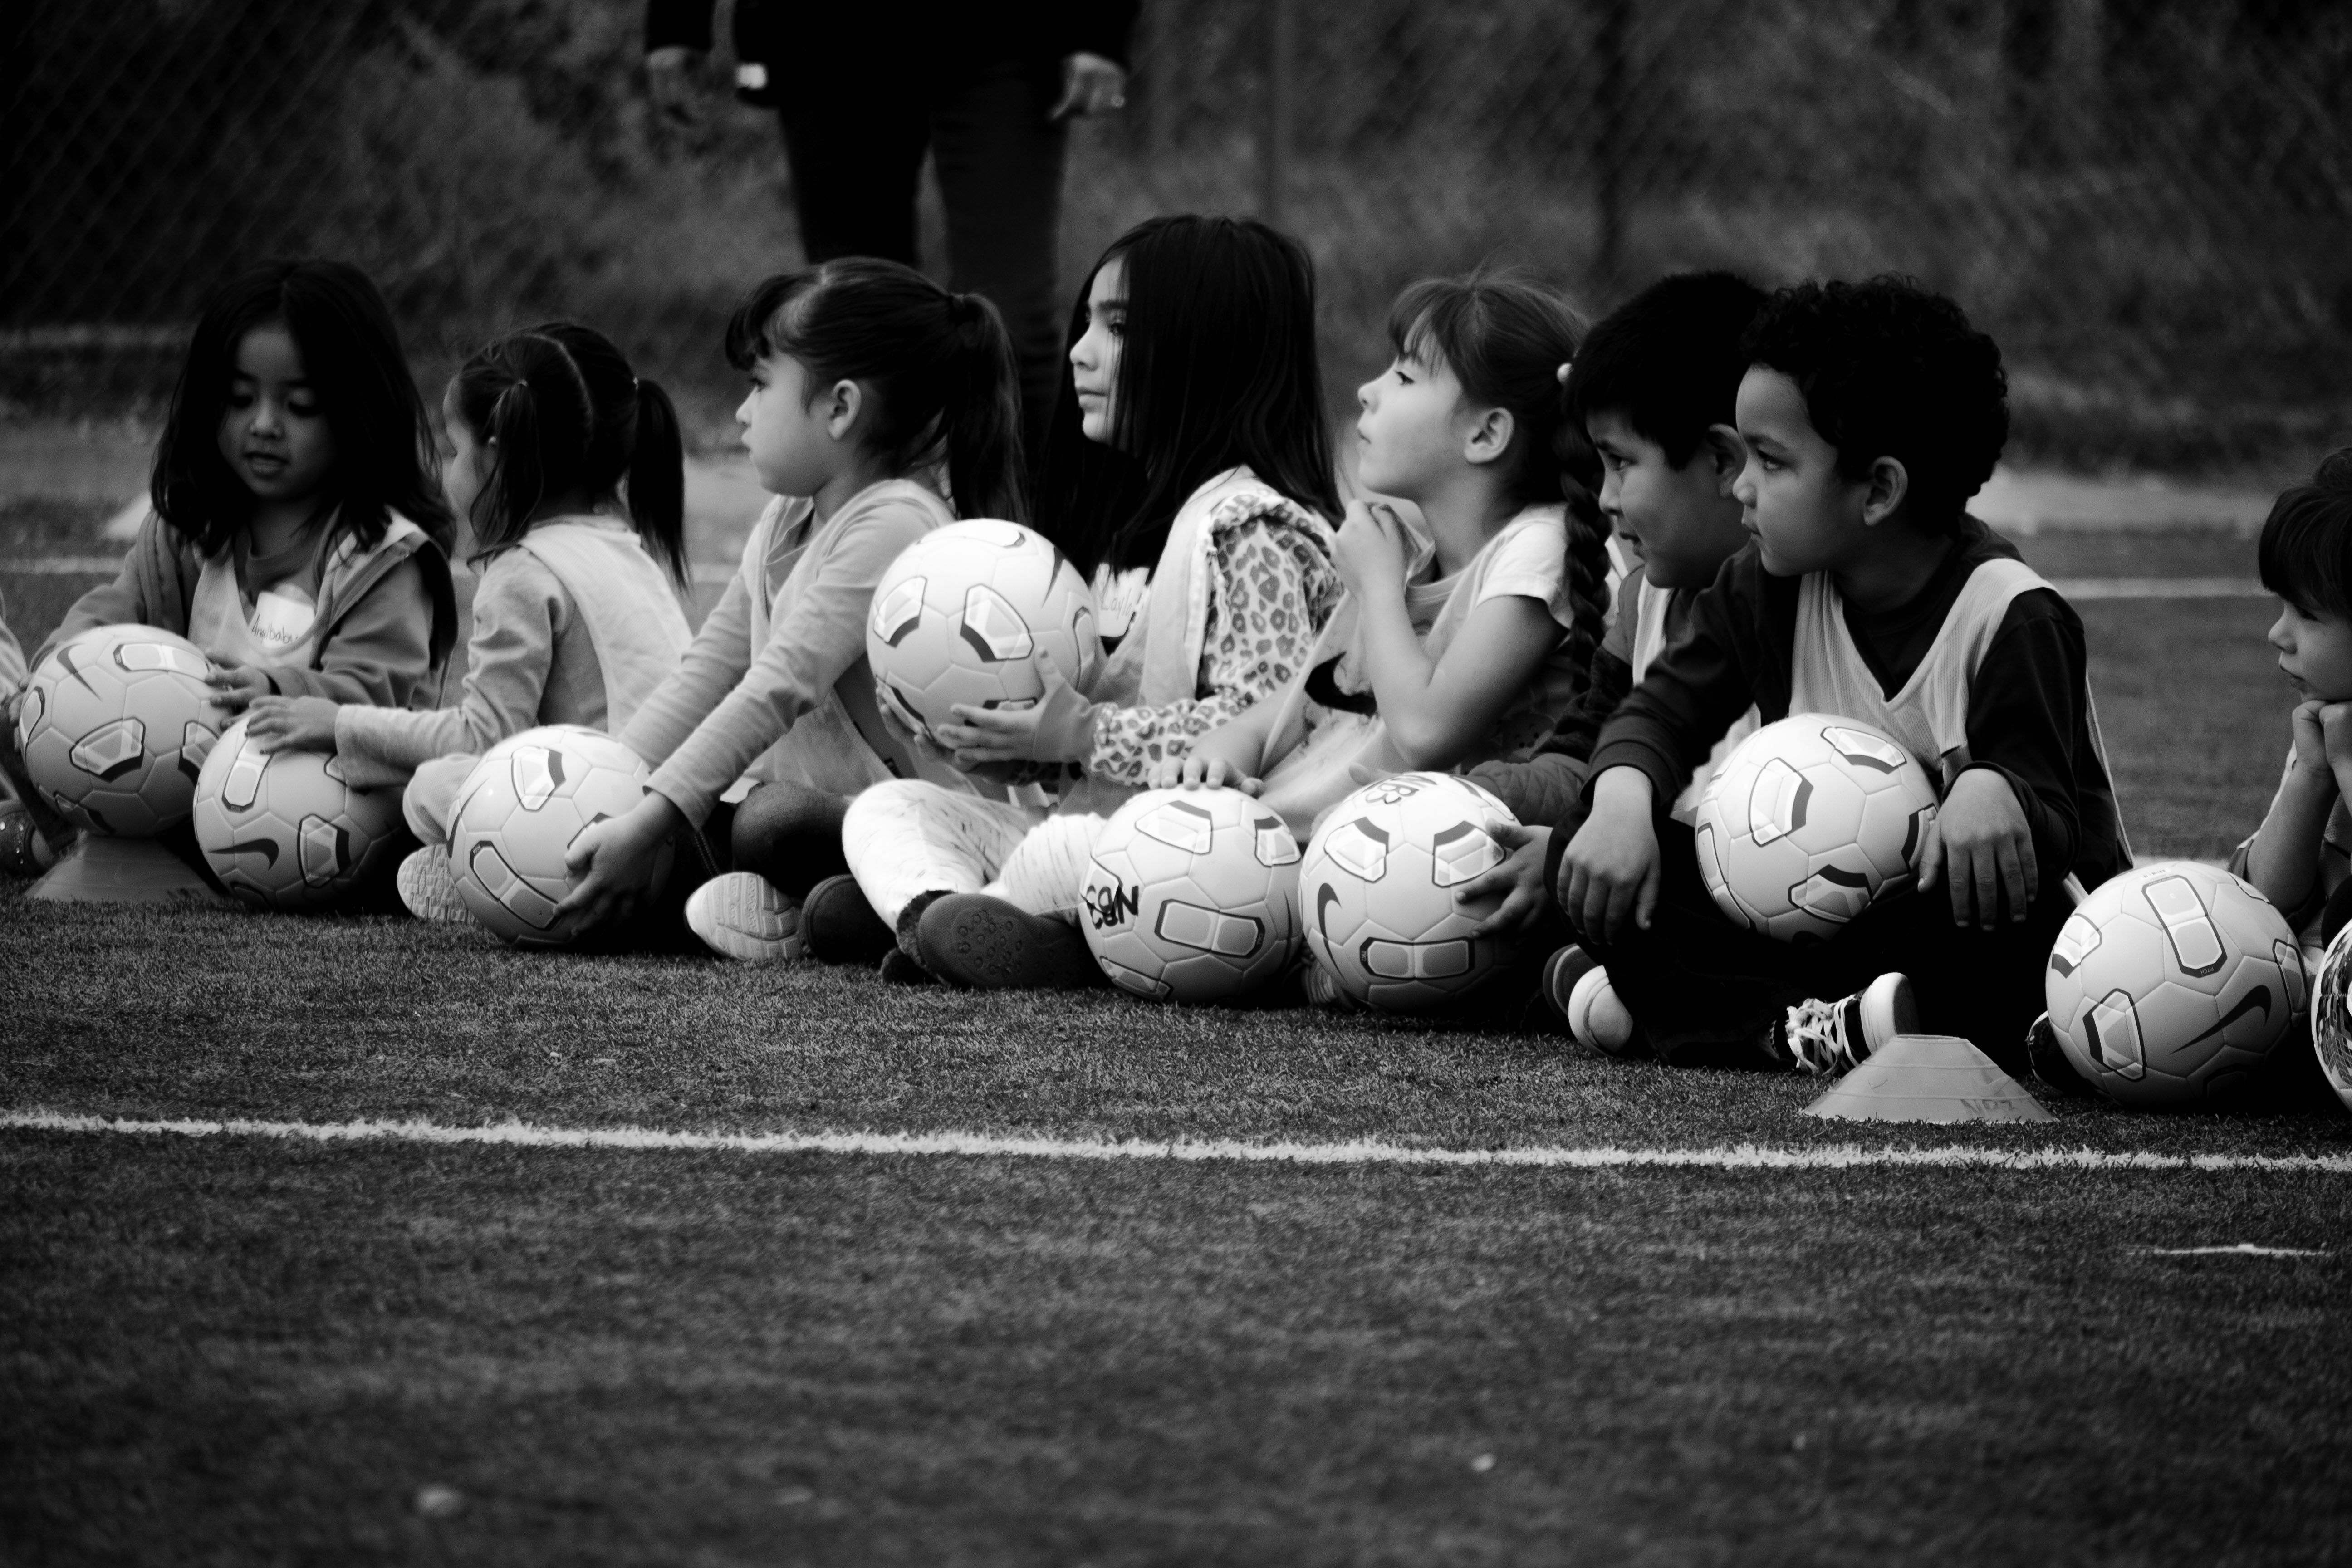 The soccer clinic at Carroll Elementary was one of the first events during NBFIT3 week—a week dedicated to kids' particiation in sports and nutrition education. Image by Viridiana Vidales Coyt. United States, 2017.